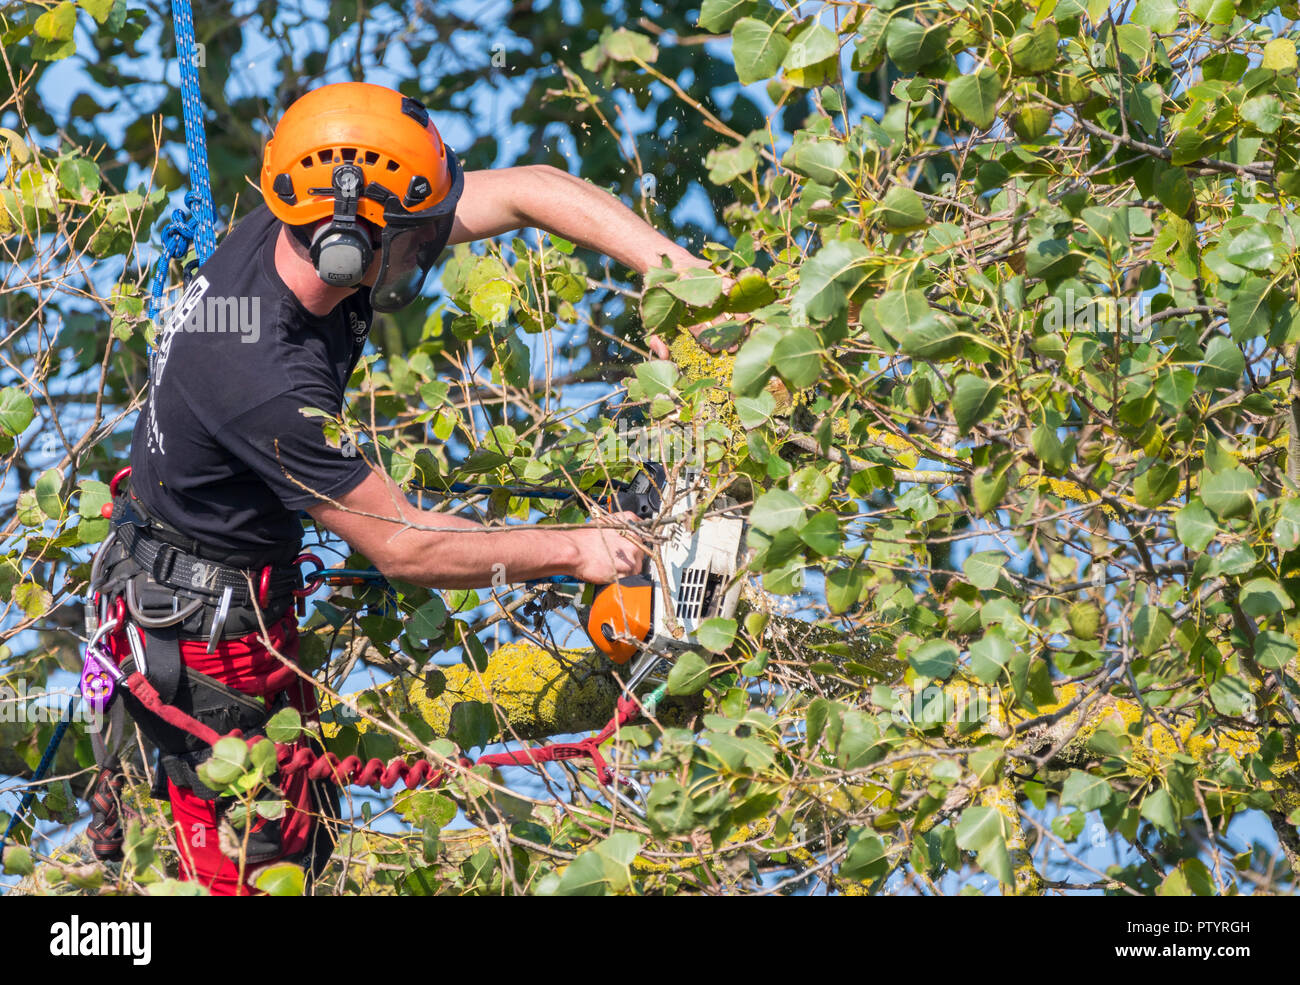 Tree surgeon in a tree in Autumn, secured by a rope, using a saw to trim a tree, in the UK. Tree surgery. Tree felling. Tree feller. Pruning trees. Stock Photo